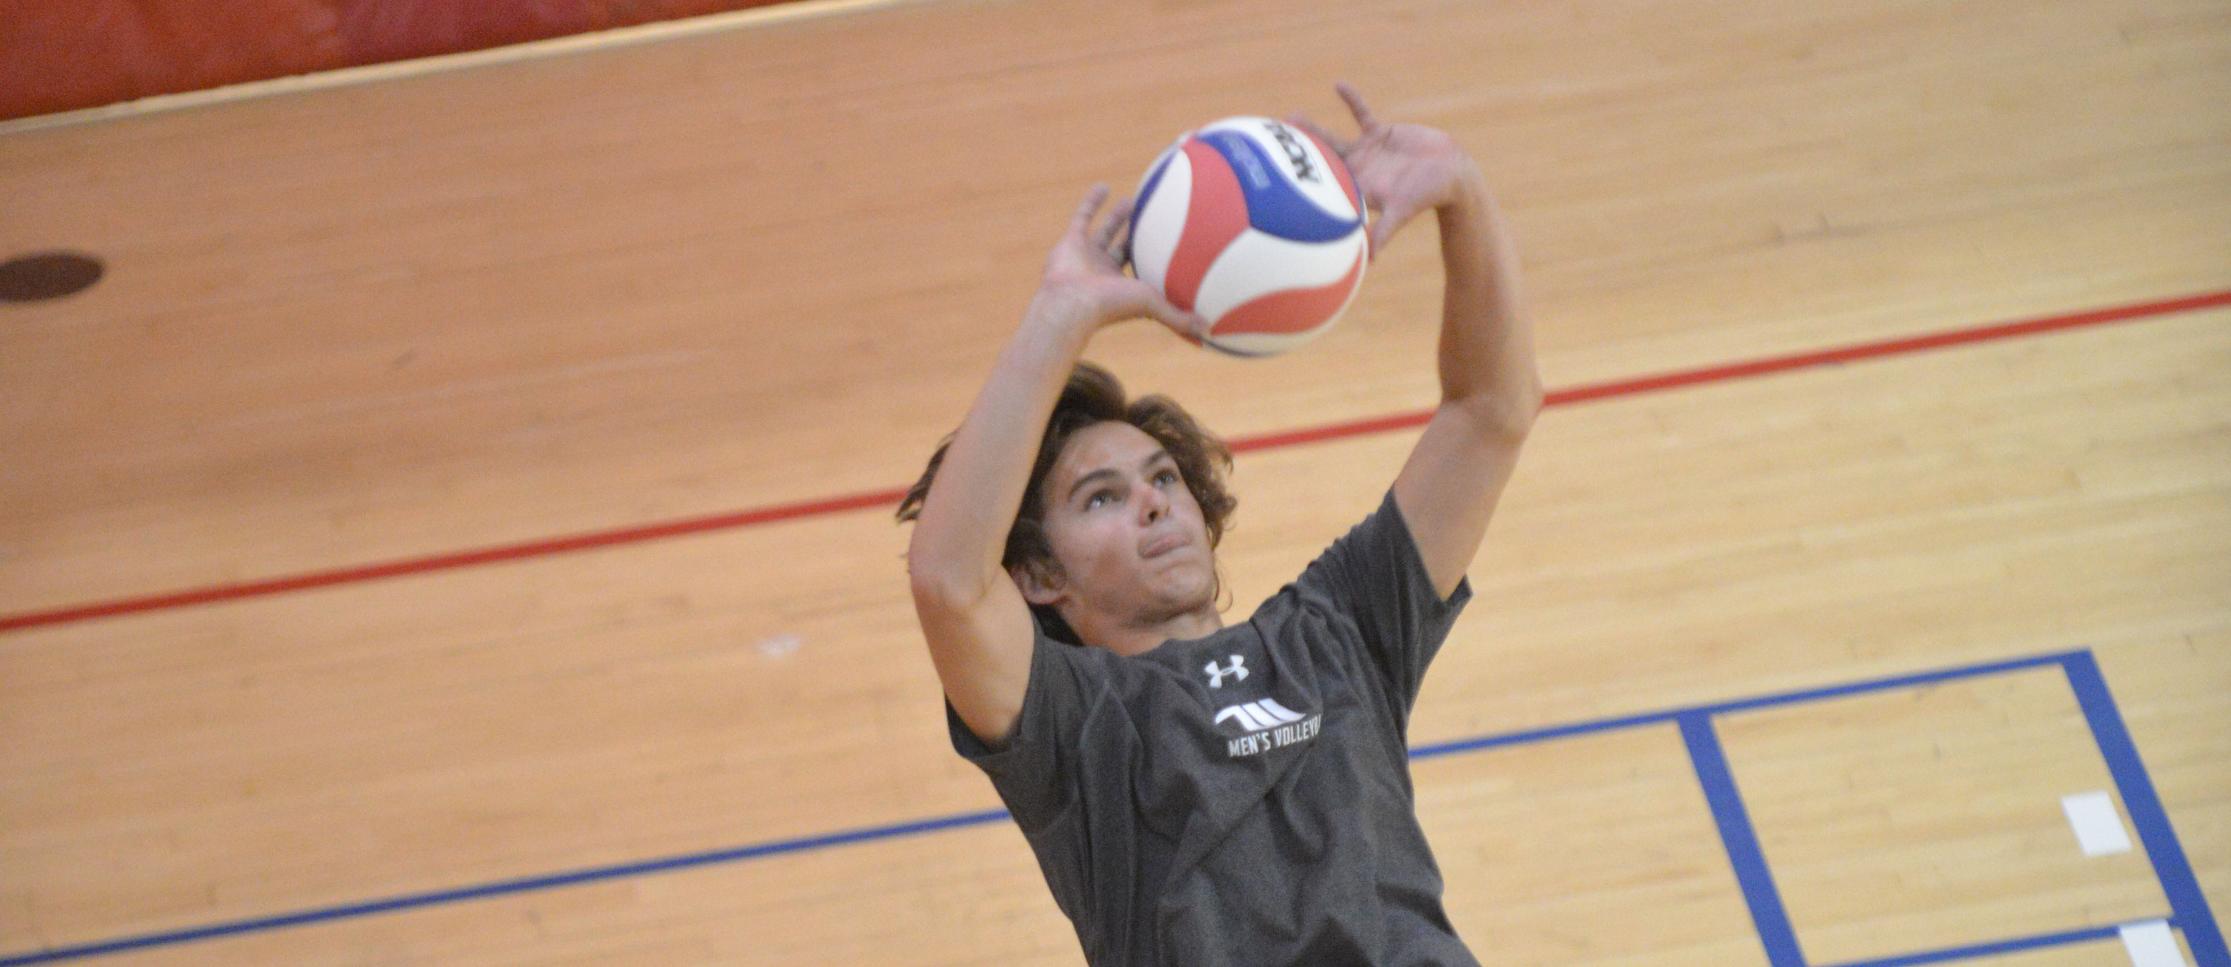 Men's Volleyball Drops Home MCVL Match to Benedictine, 3-1